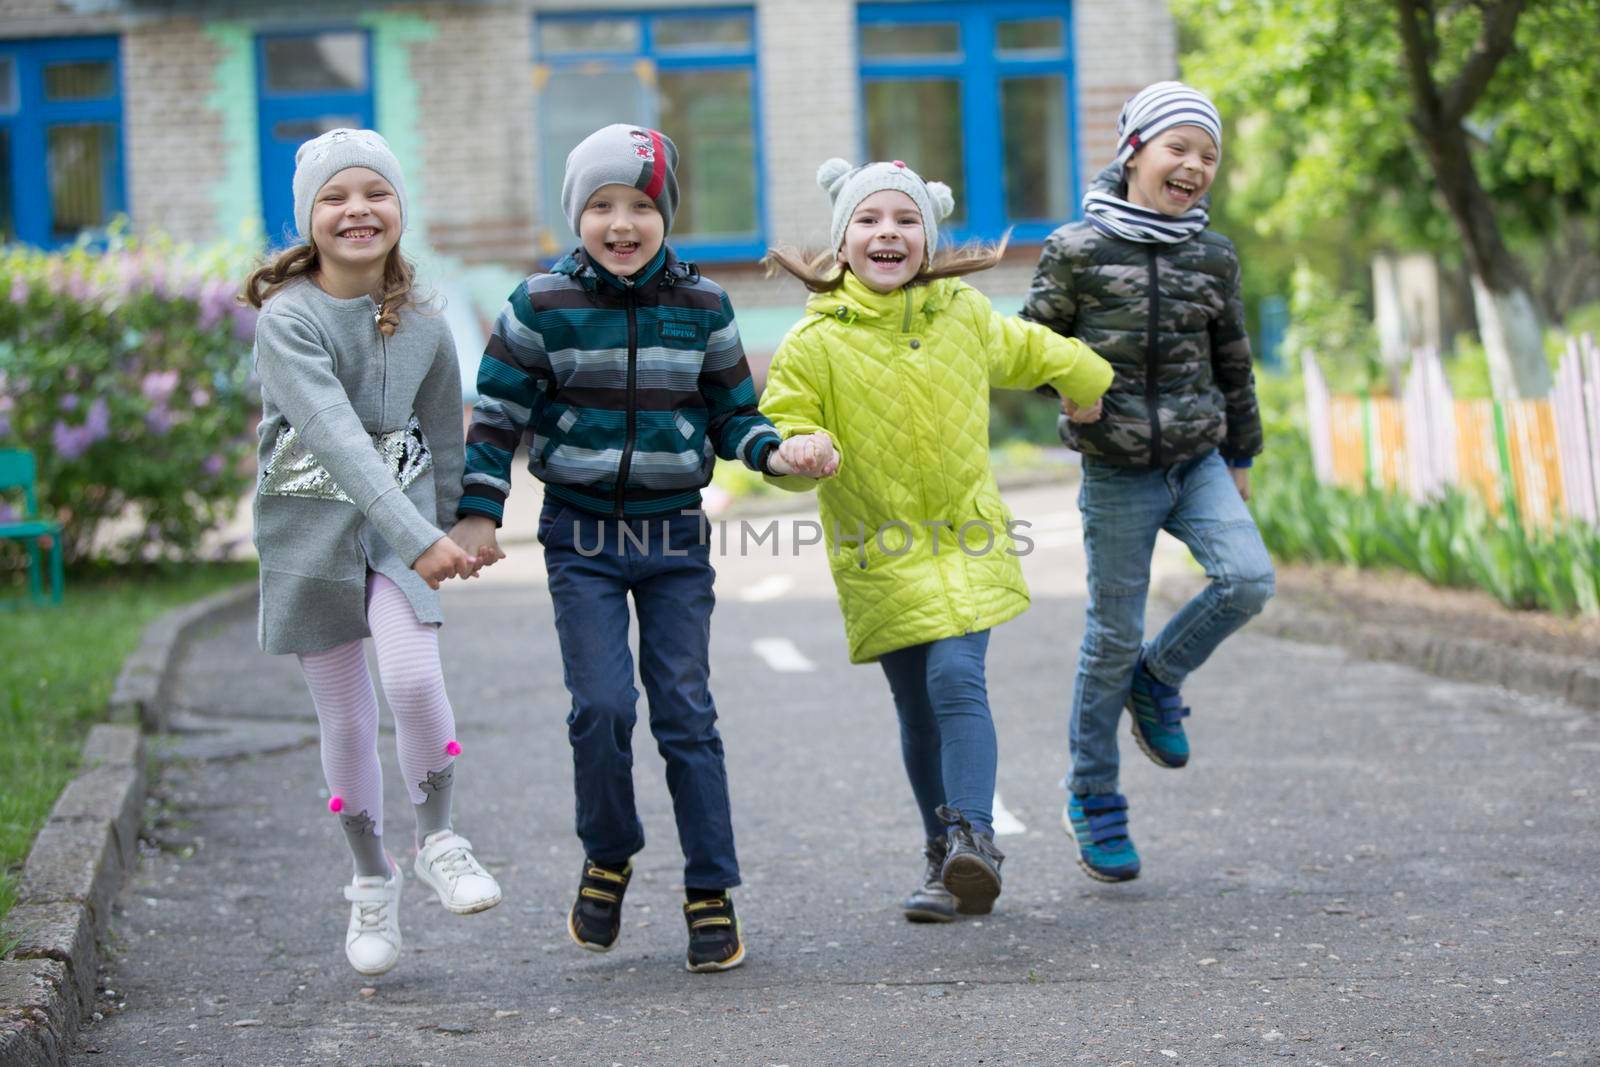 Belarus, the city of Gomel, May 10, 2019. Open day in kindergarten.Happy preschoolers on the street. Children holding hands jumping. A group of six year old friends.